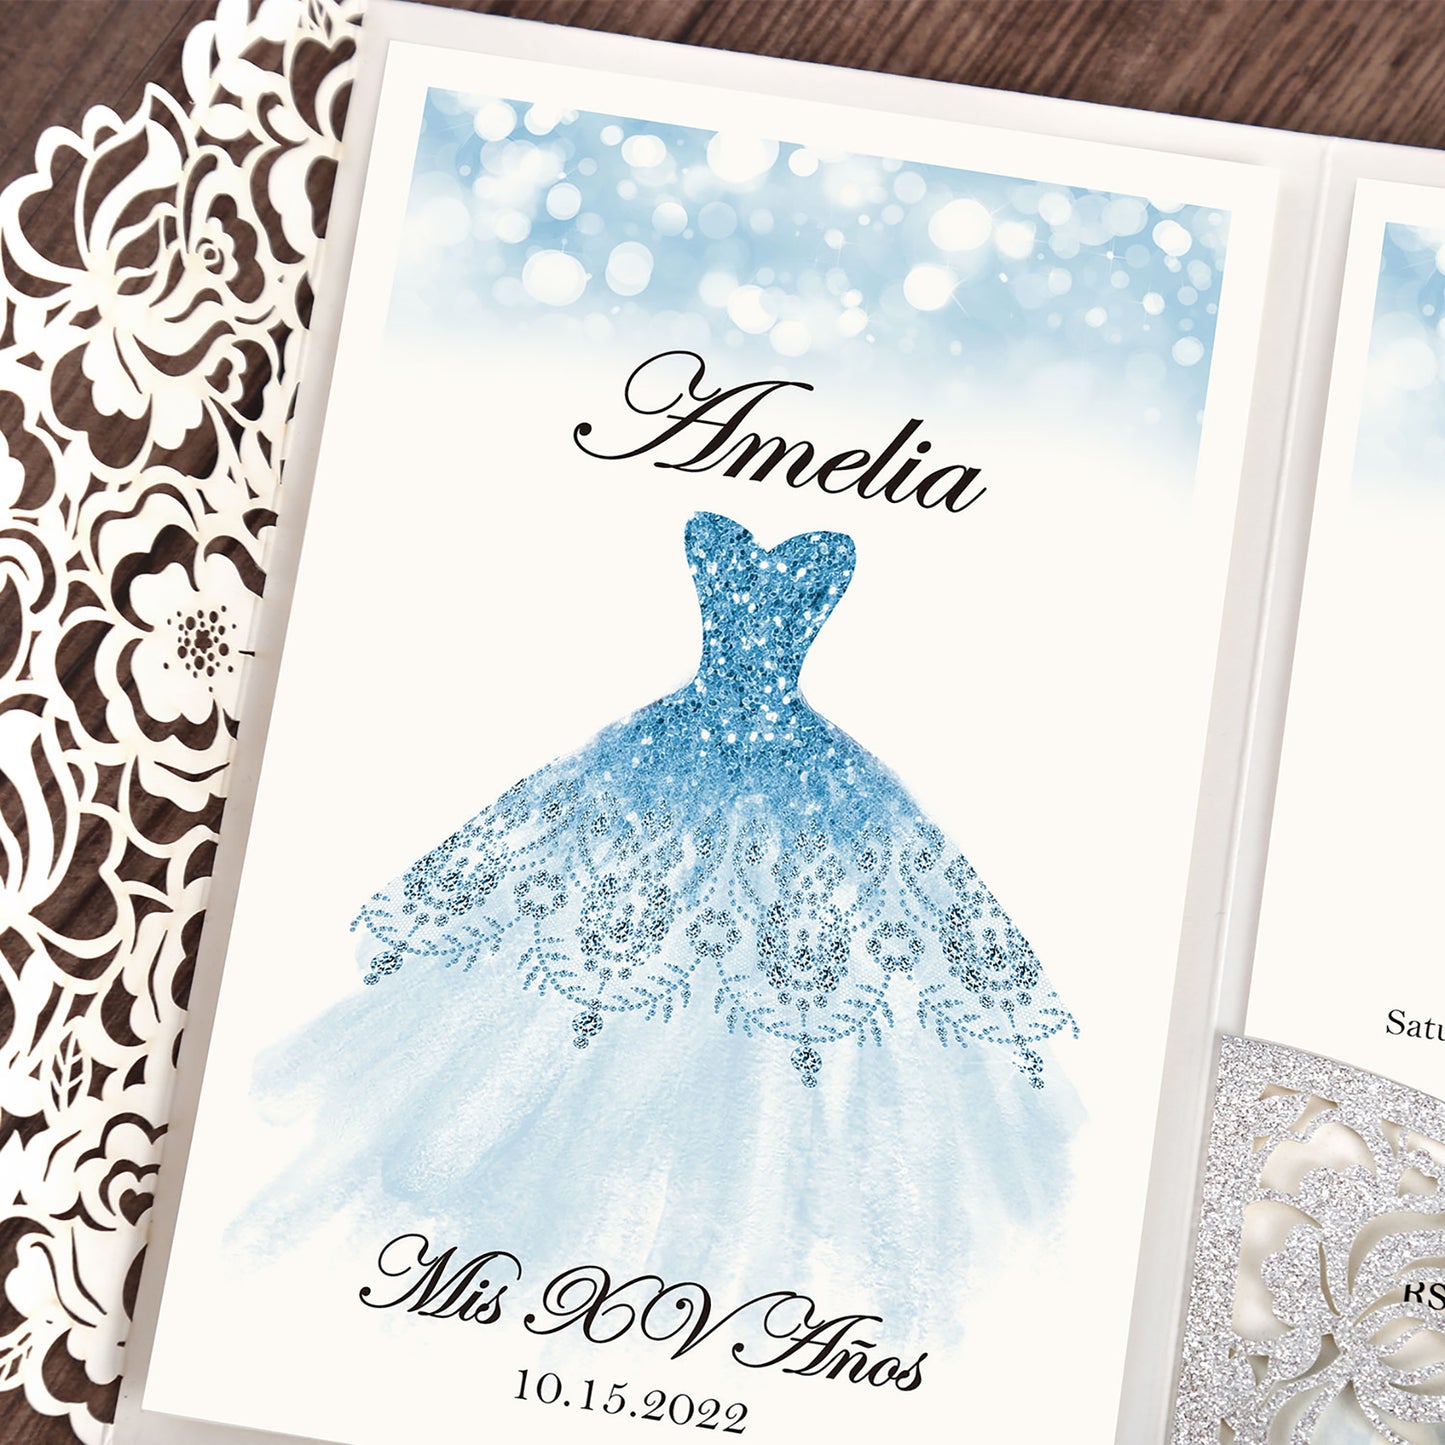 Glitter Silver Floral Laser cut invitation cards for Quinceanera